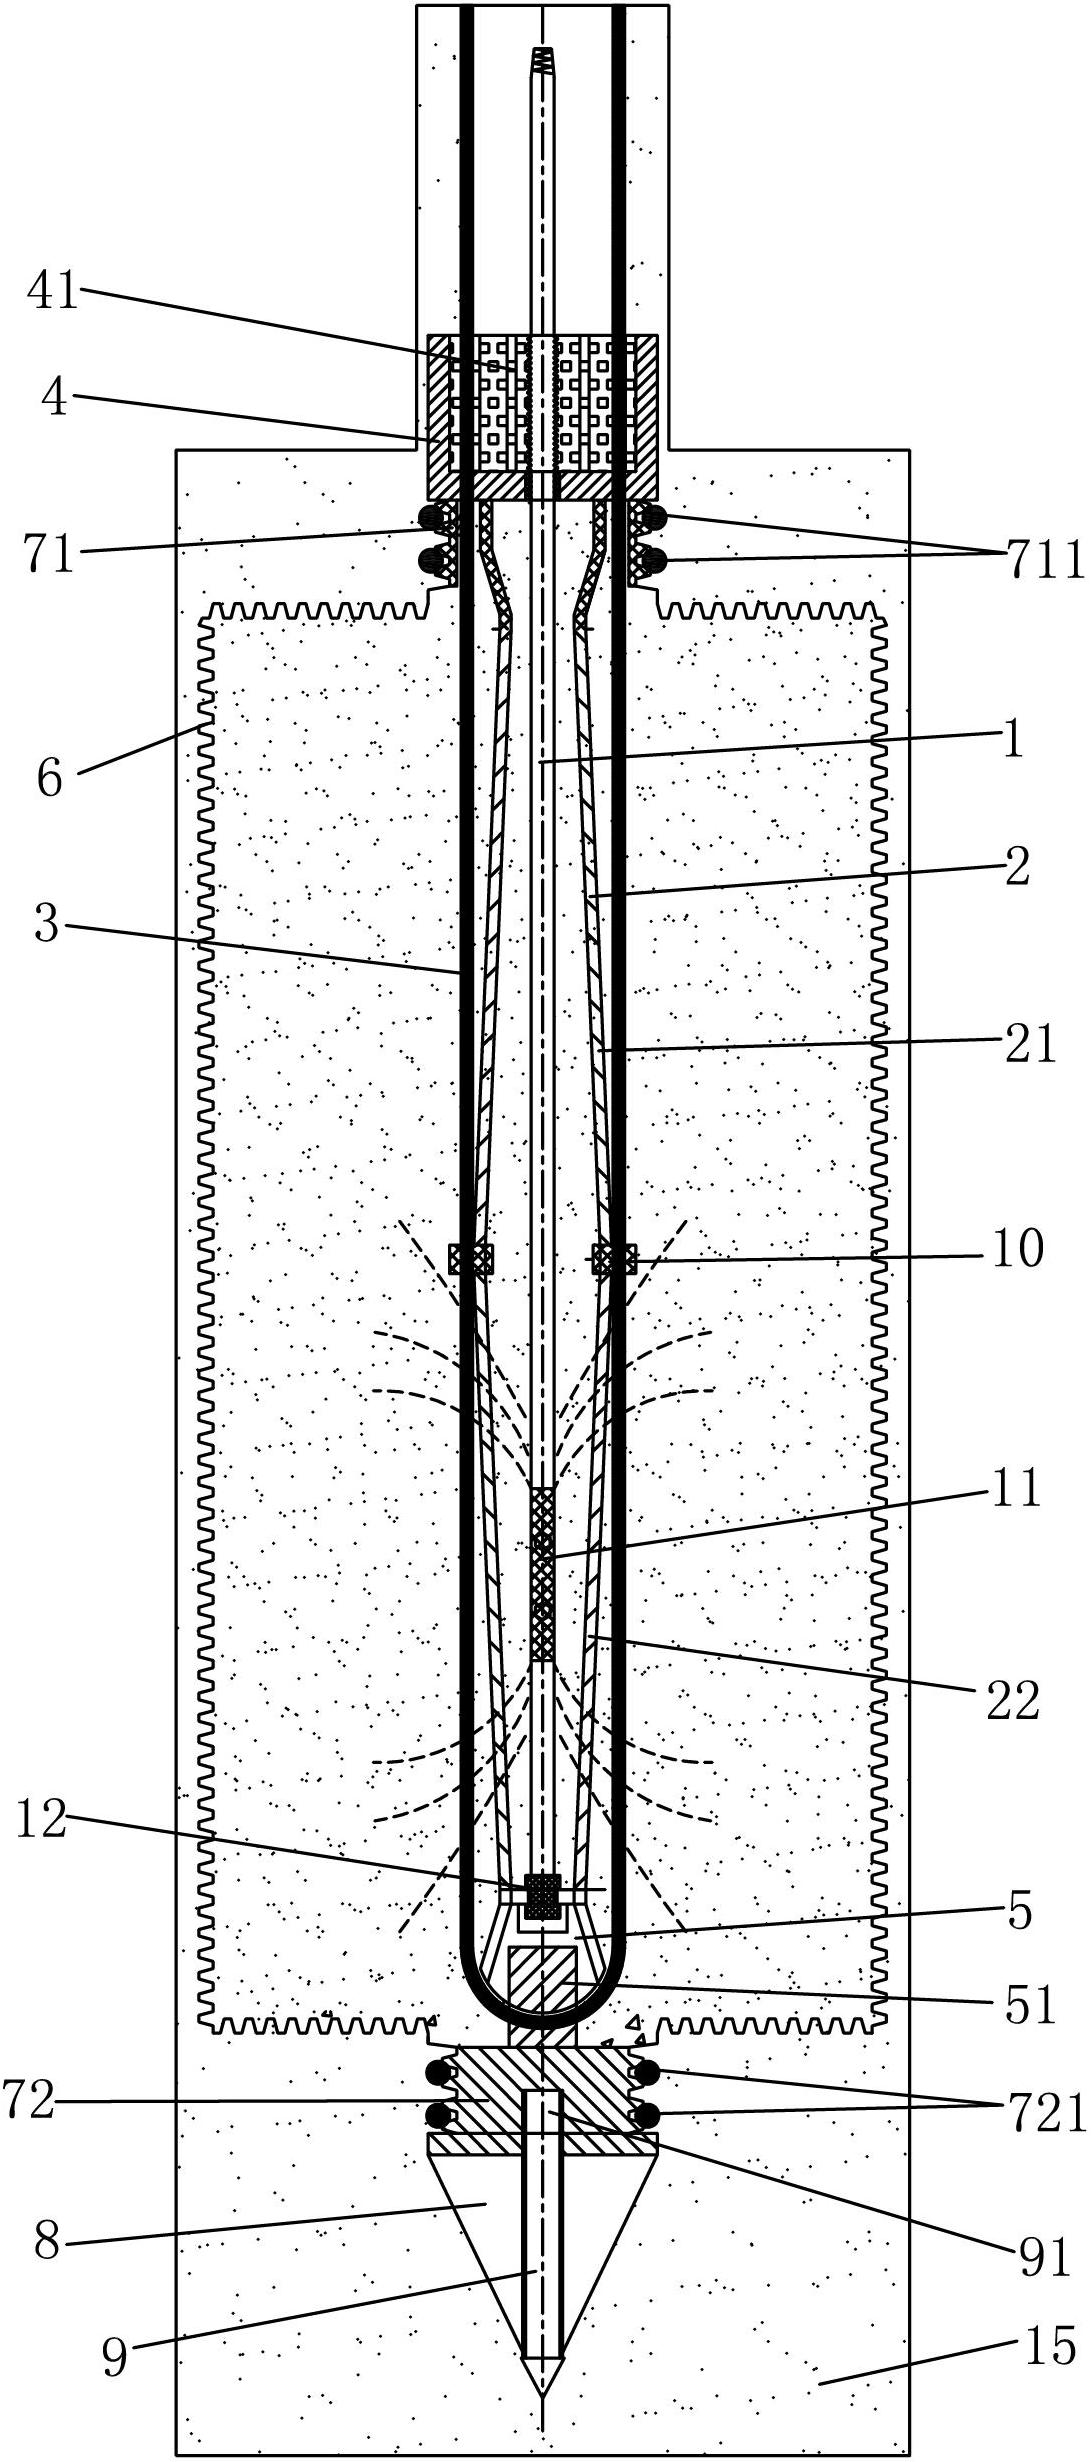 Embedded recoverable expansion anchor cable and construction method thereof